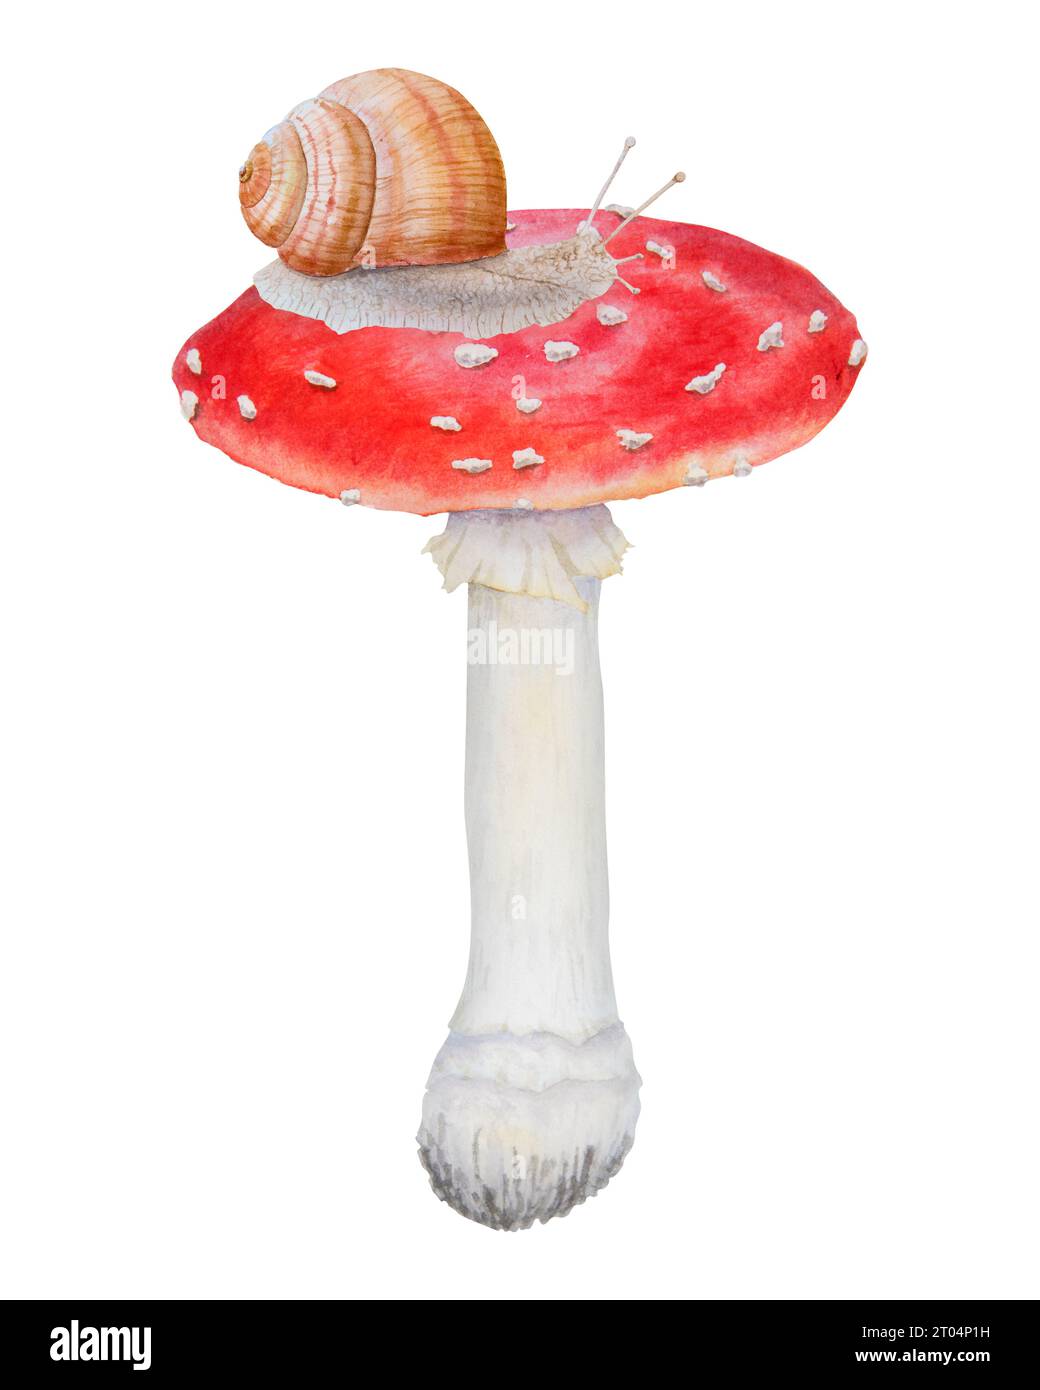 Red fly agaric and grape Roman snail. Watercolor hand drawn illustration. Realistic botanical Amanita muscaria mushroom clip art for books, stickers Stock Photo